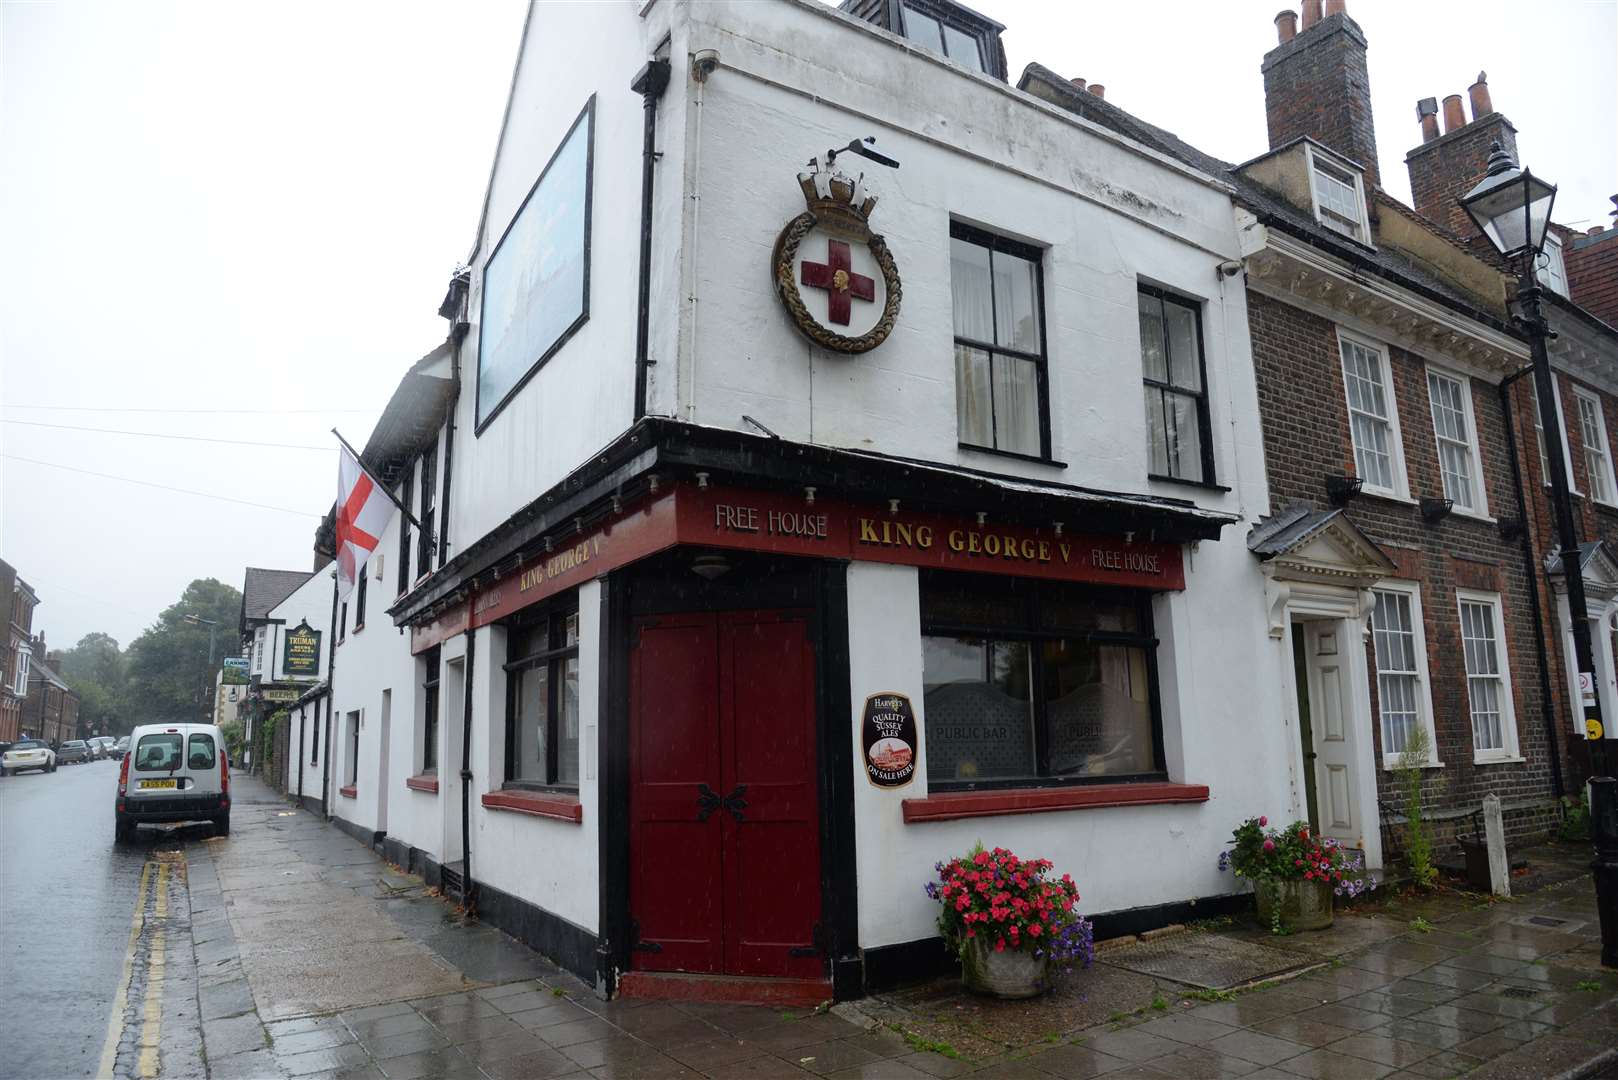 The King George V pub in Brompton is closing for the last time on New Year's Eve